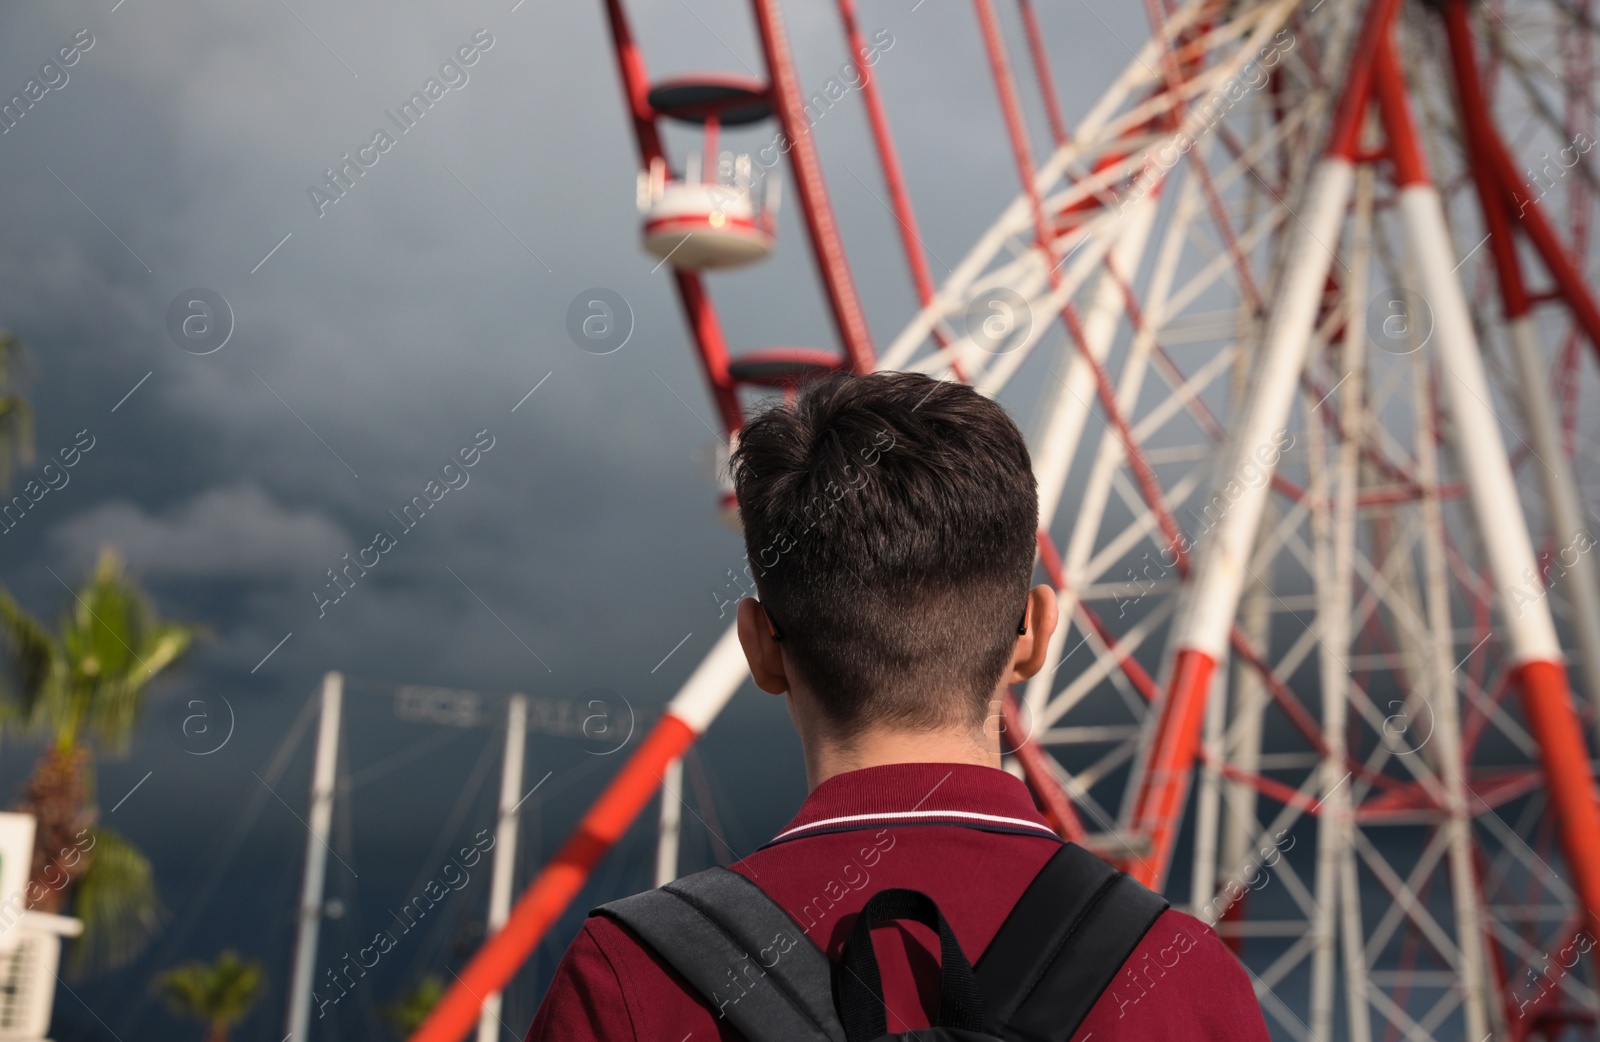 Photo of Teenage boy near large Ferris wheel outdoors, back view. Space for text